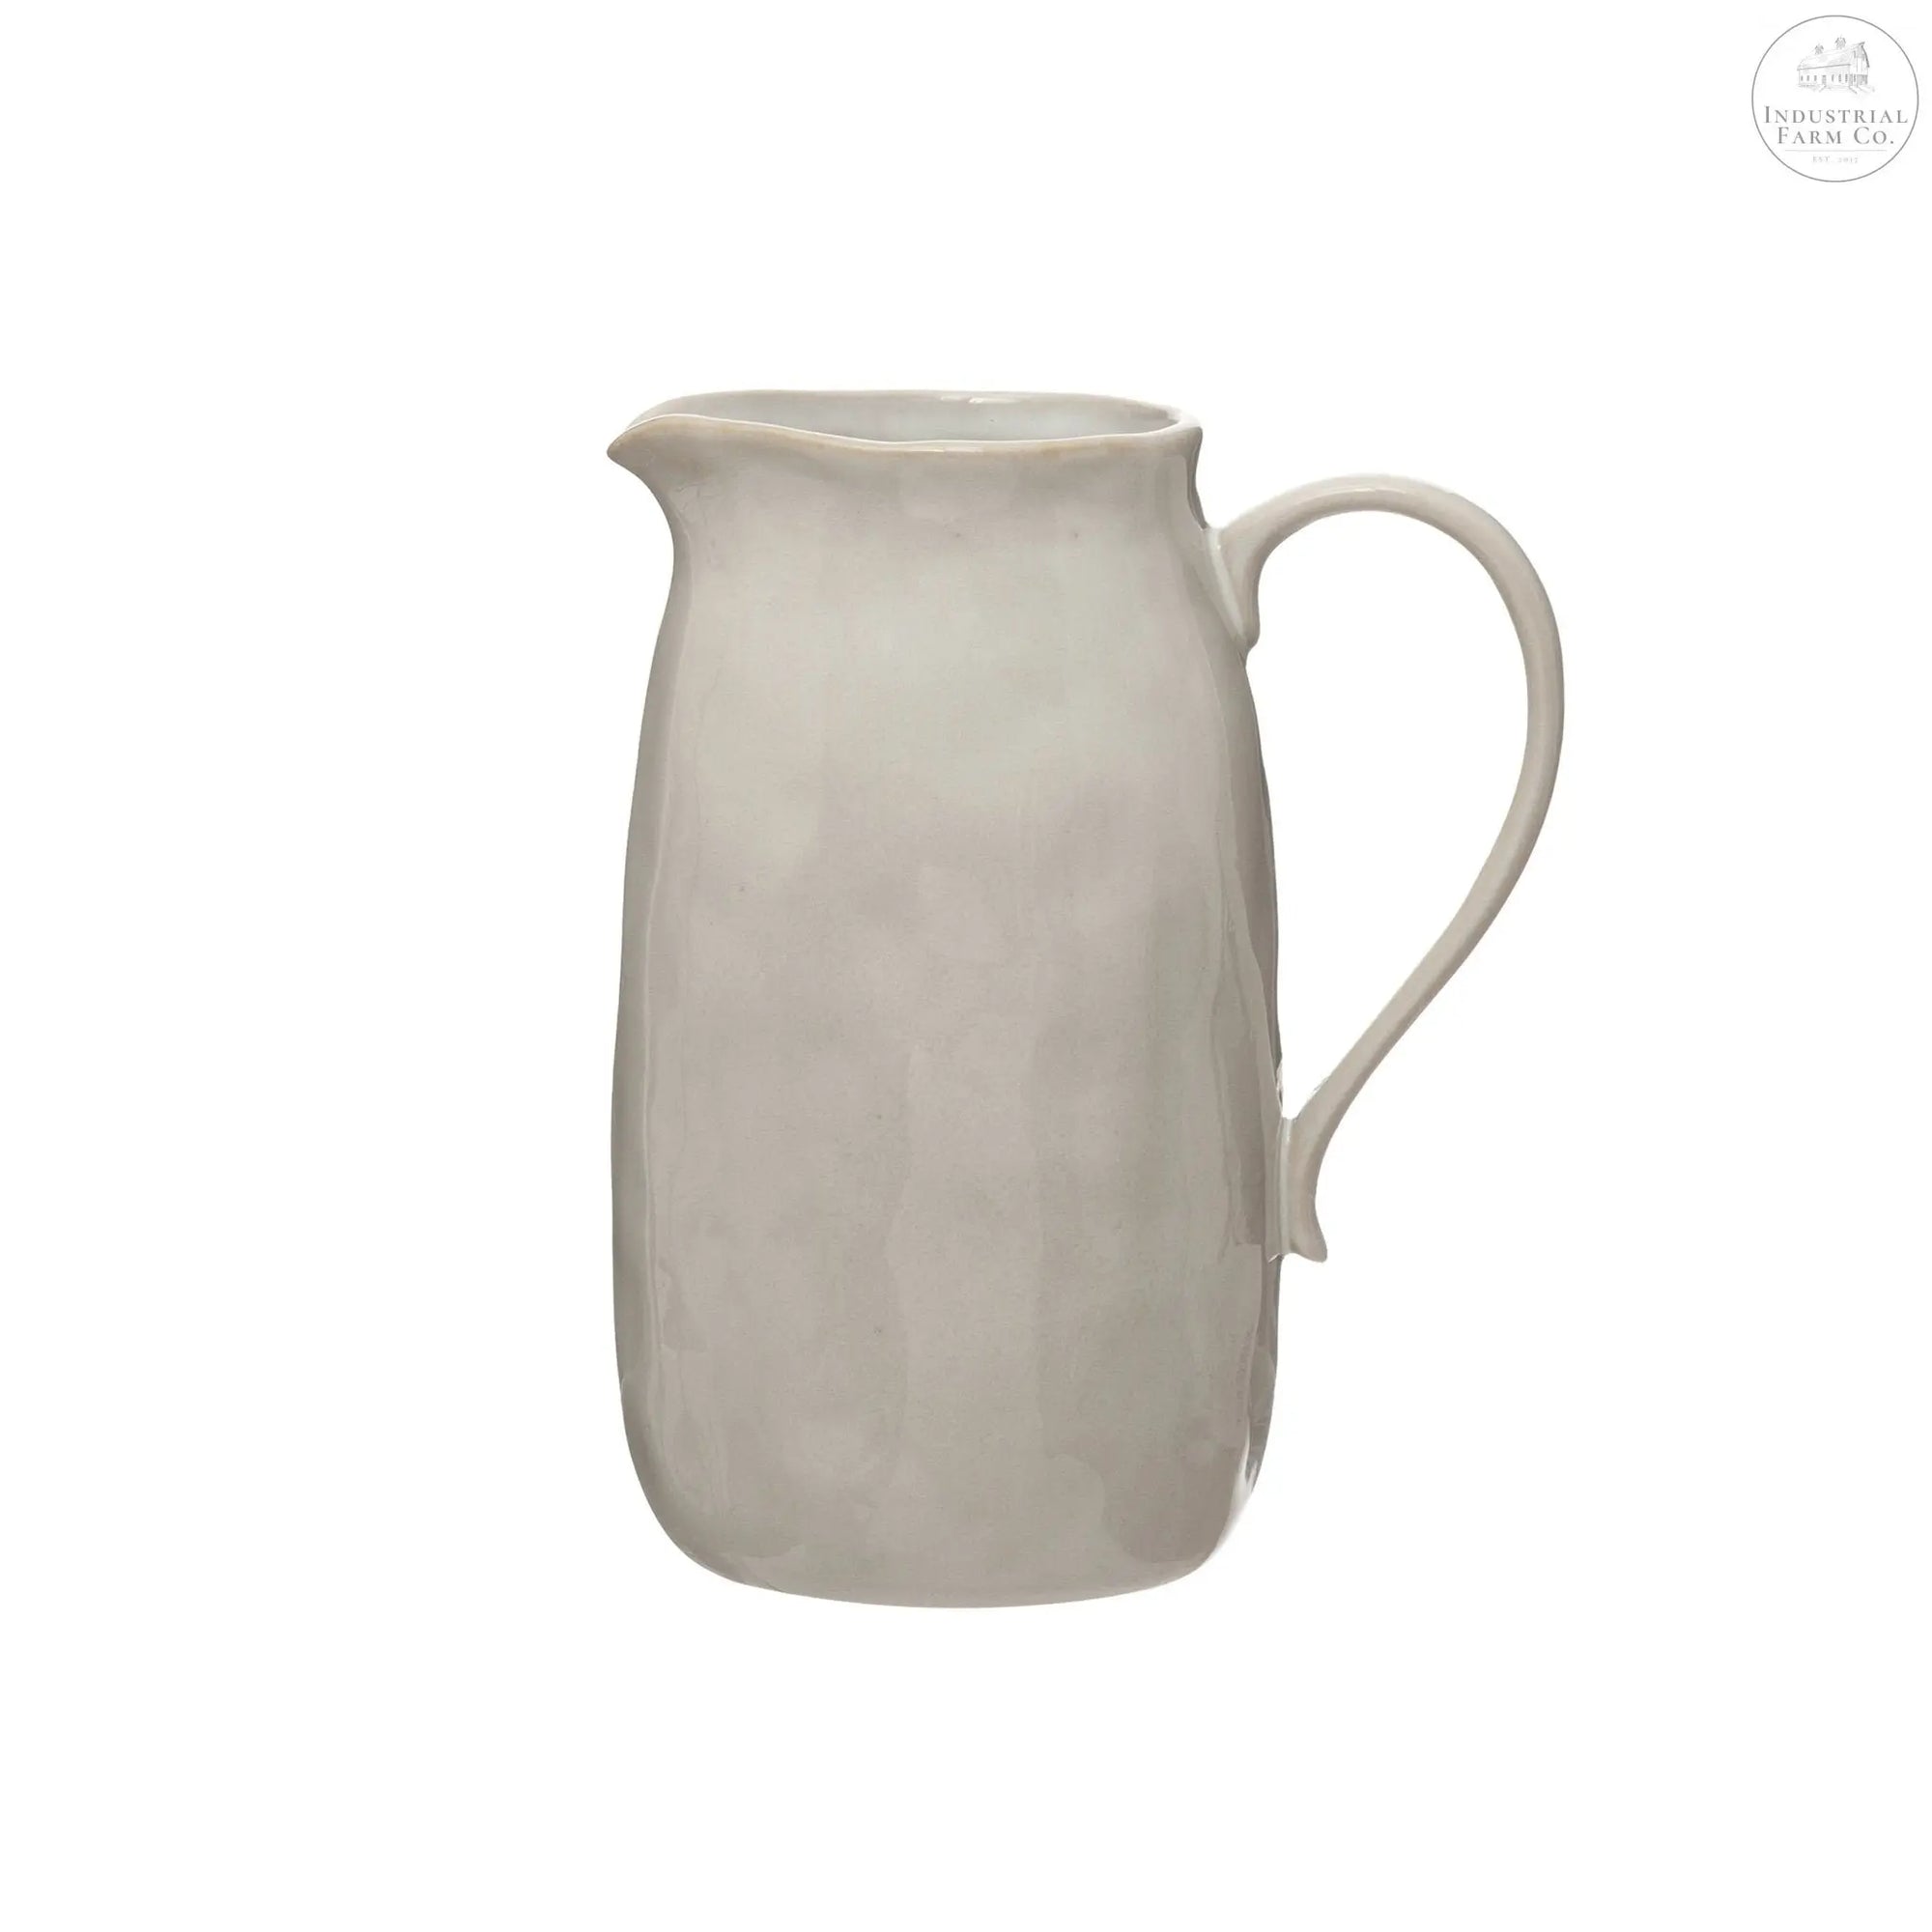 The Lilly Stoneware Pitcher Serving Pitchers & Carafes Default Title   | Industrial Farm Co